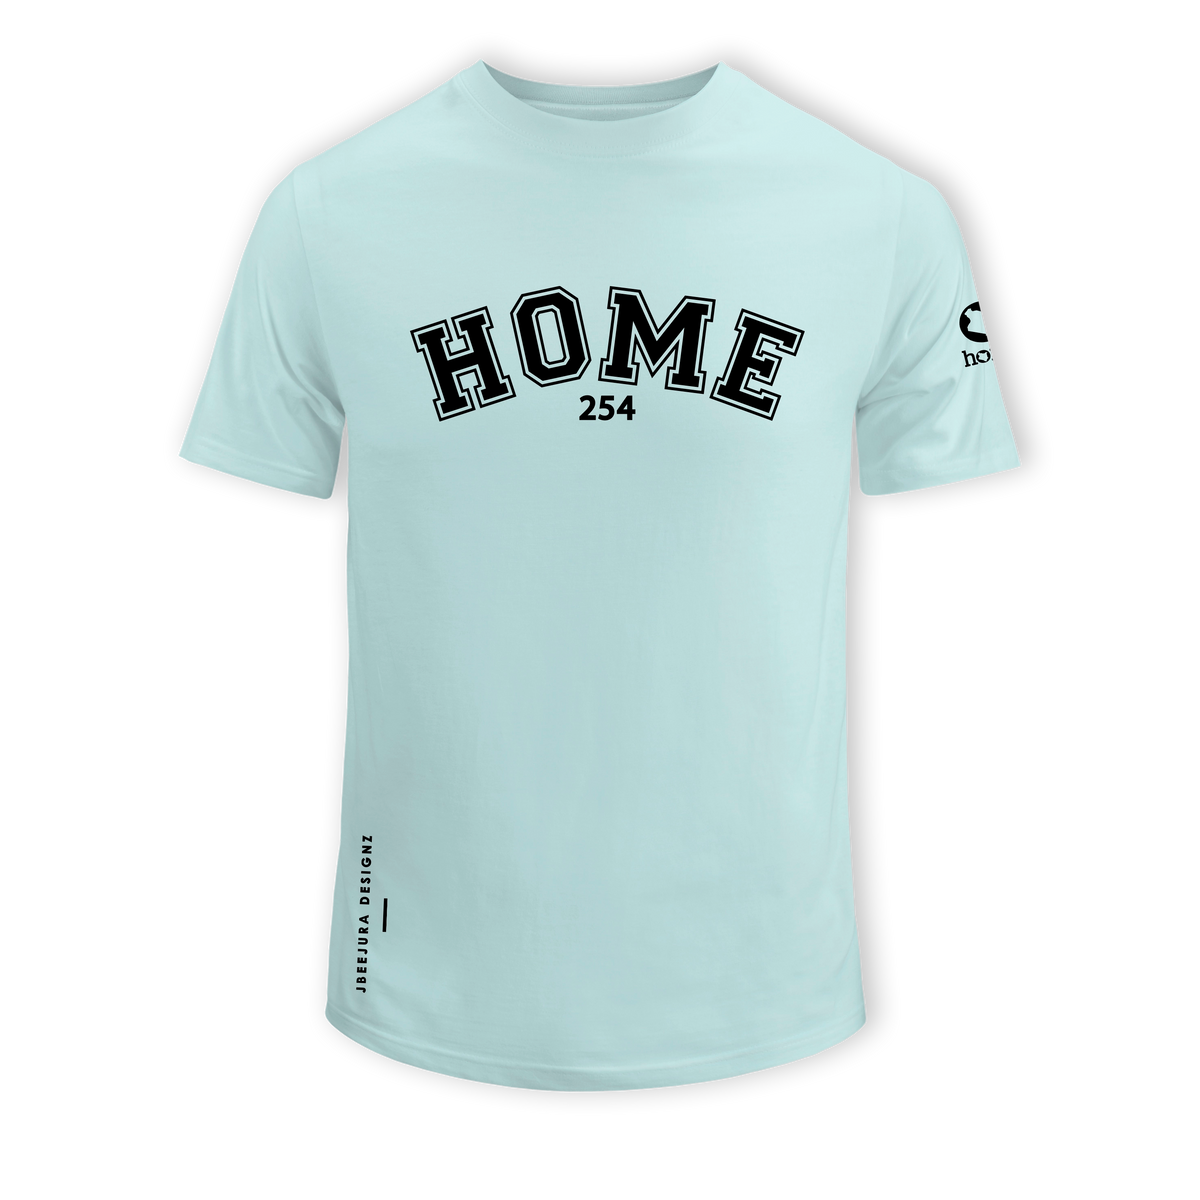 home_254 SHORT-SLEEVED MISTY BLUE T-SHIRT WITH A BLACK COLLEGE PRINT – COTTON PLUS FABRIC